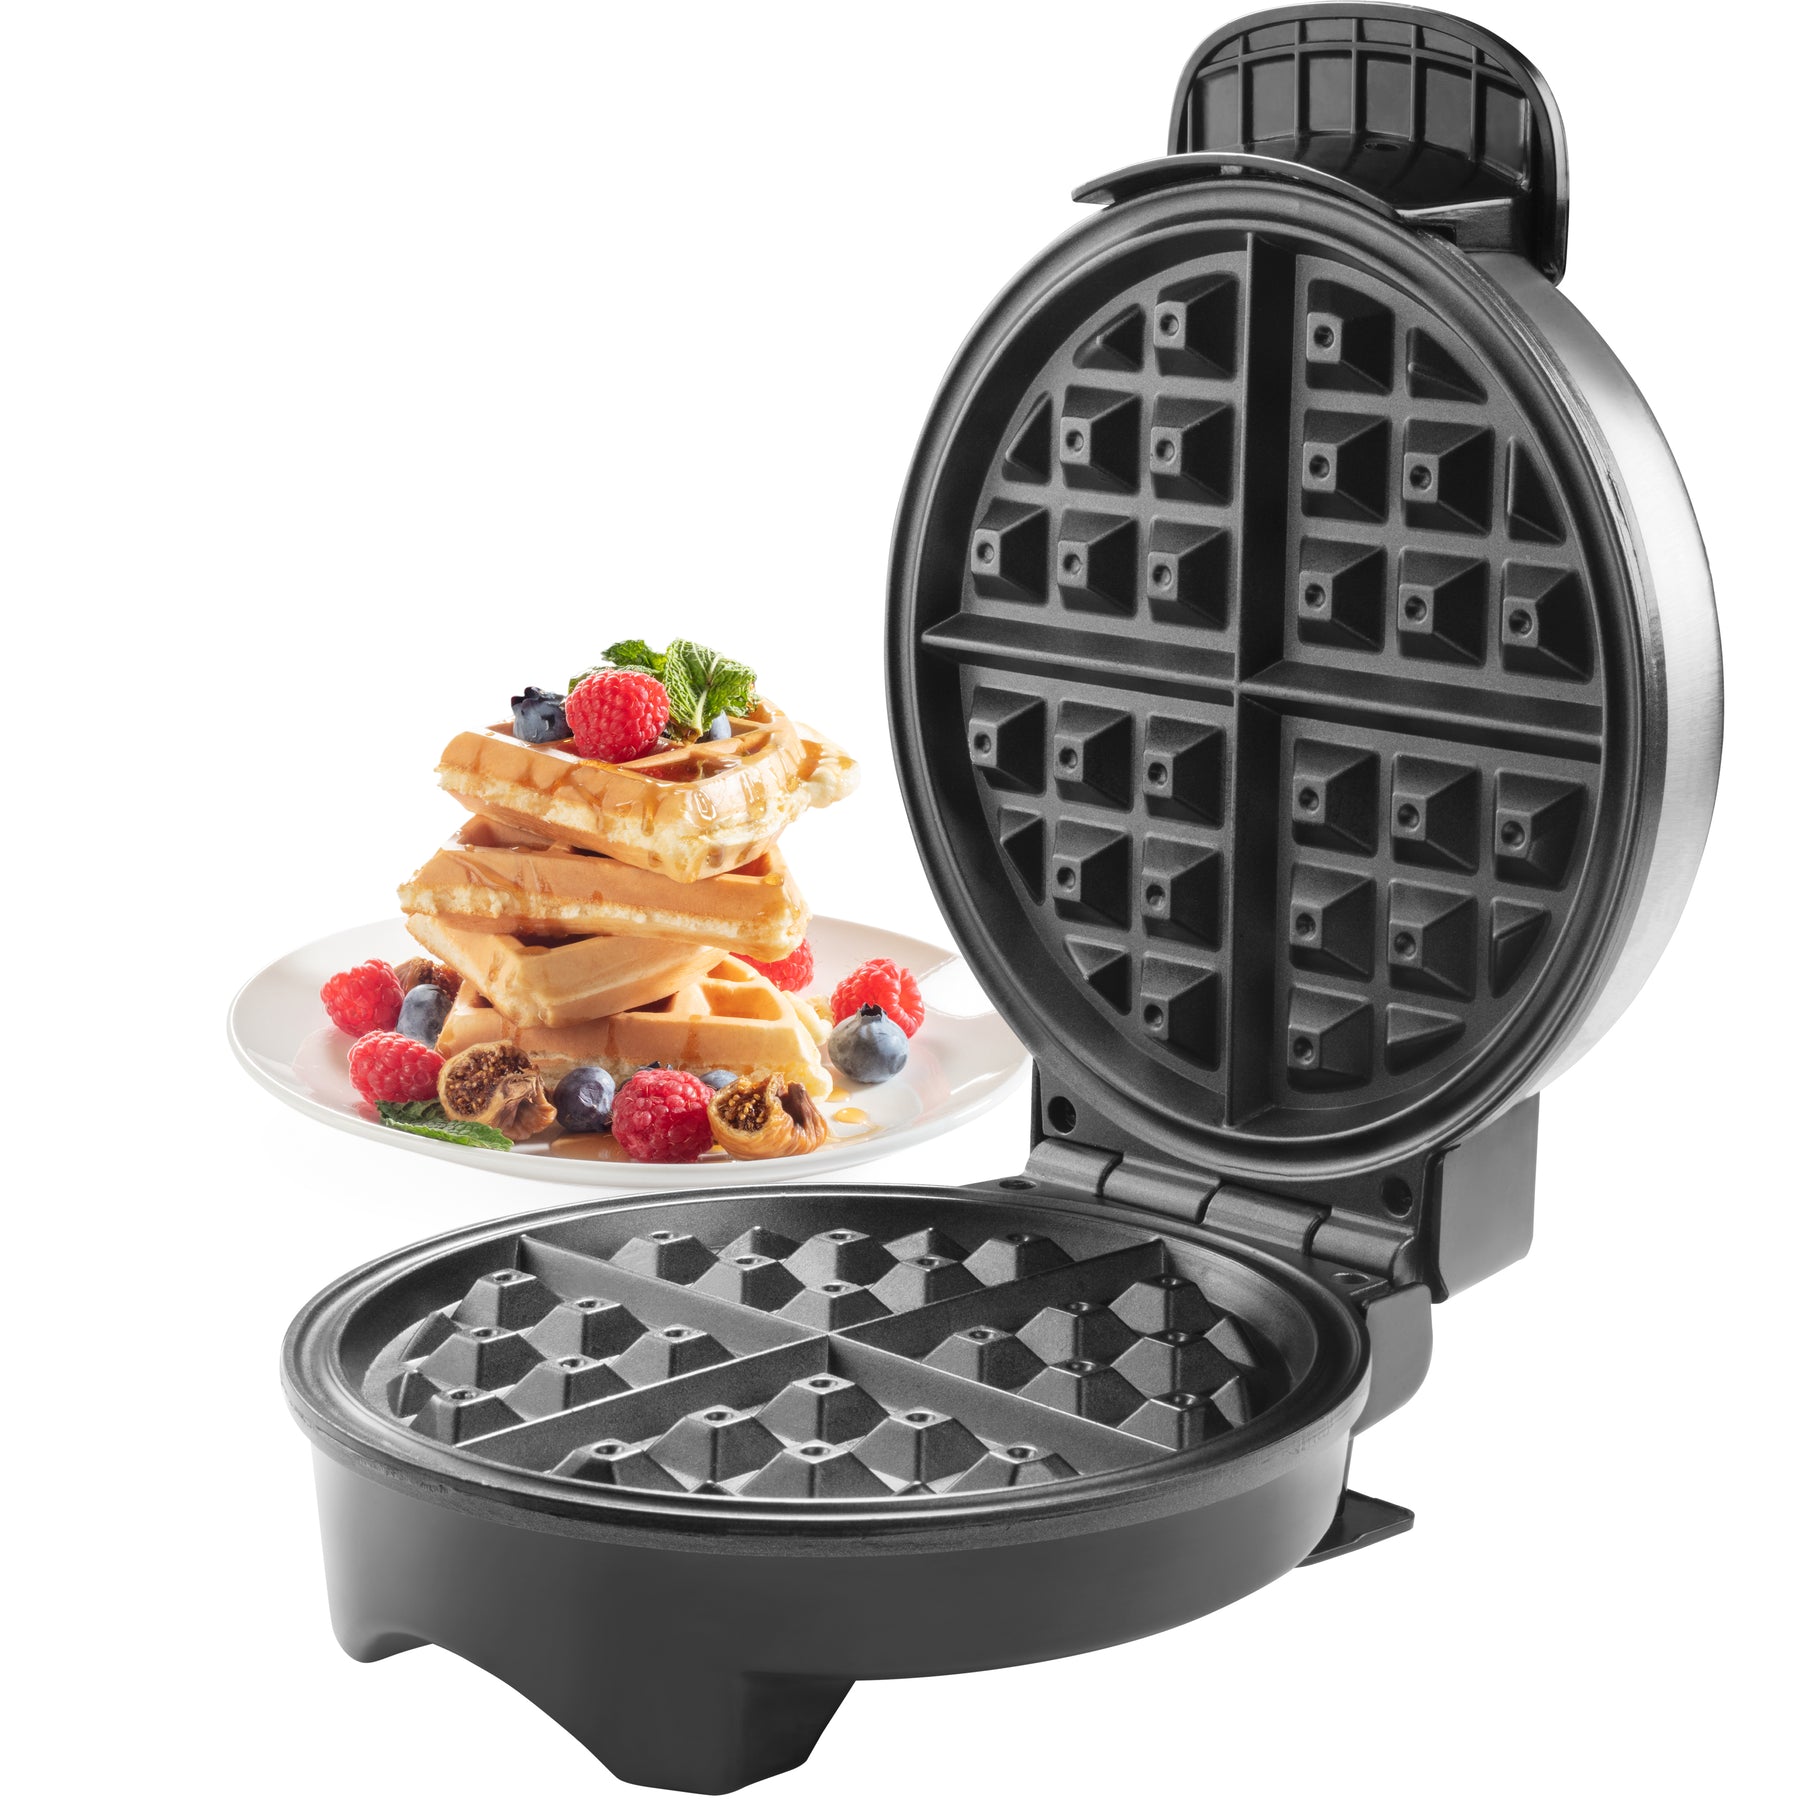 Cucina Pro 1474 Waffle Maker- Non-stick Classic American Waffler Iron with  Adjustable Browning Control- Thin, Non-Belgium Style